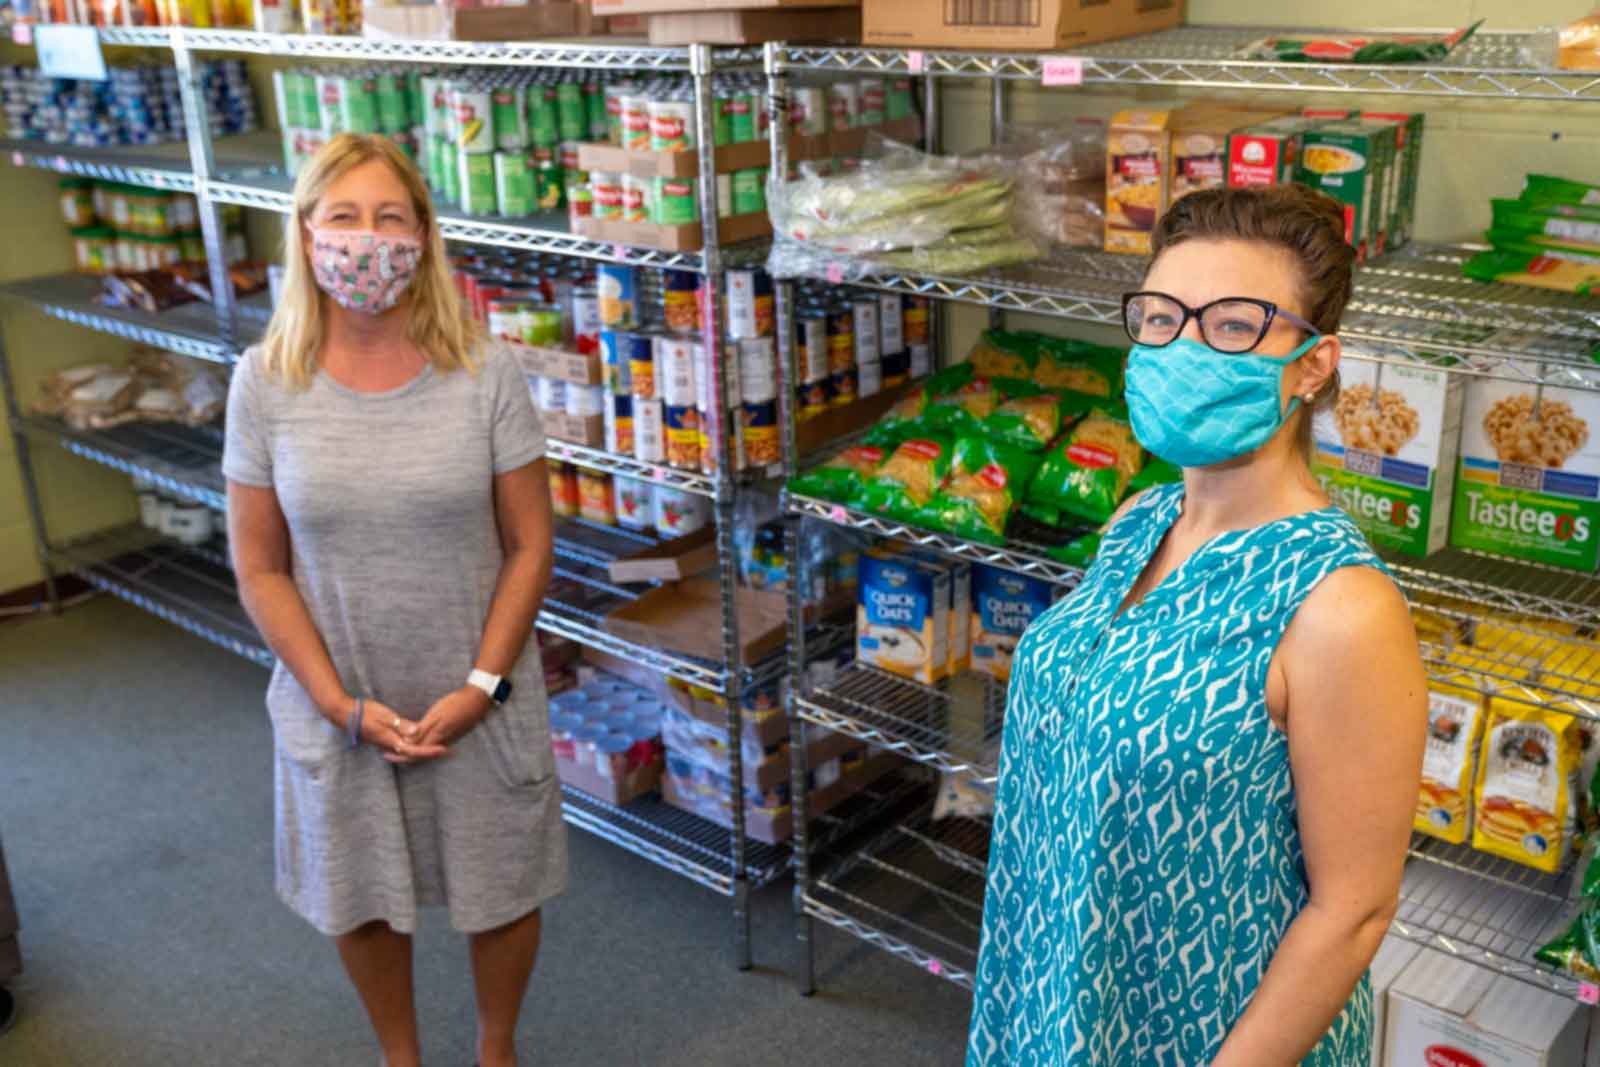 Two women stand in a food pantry isle